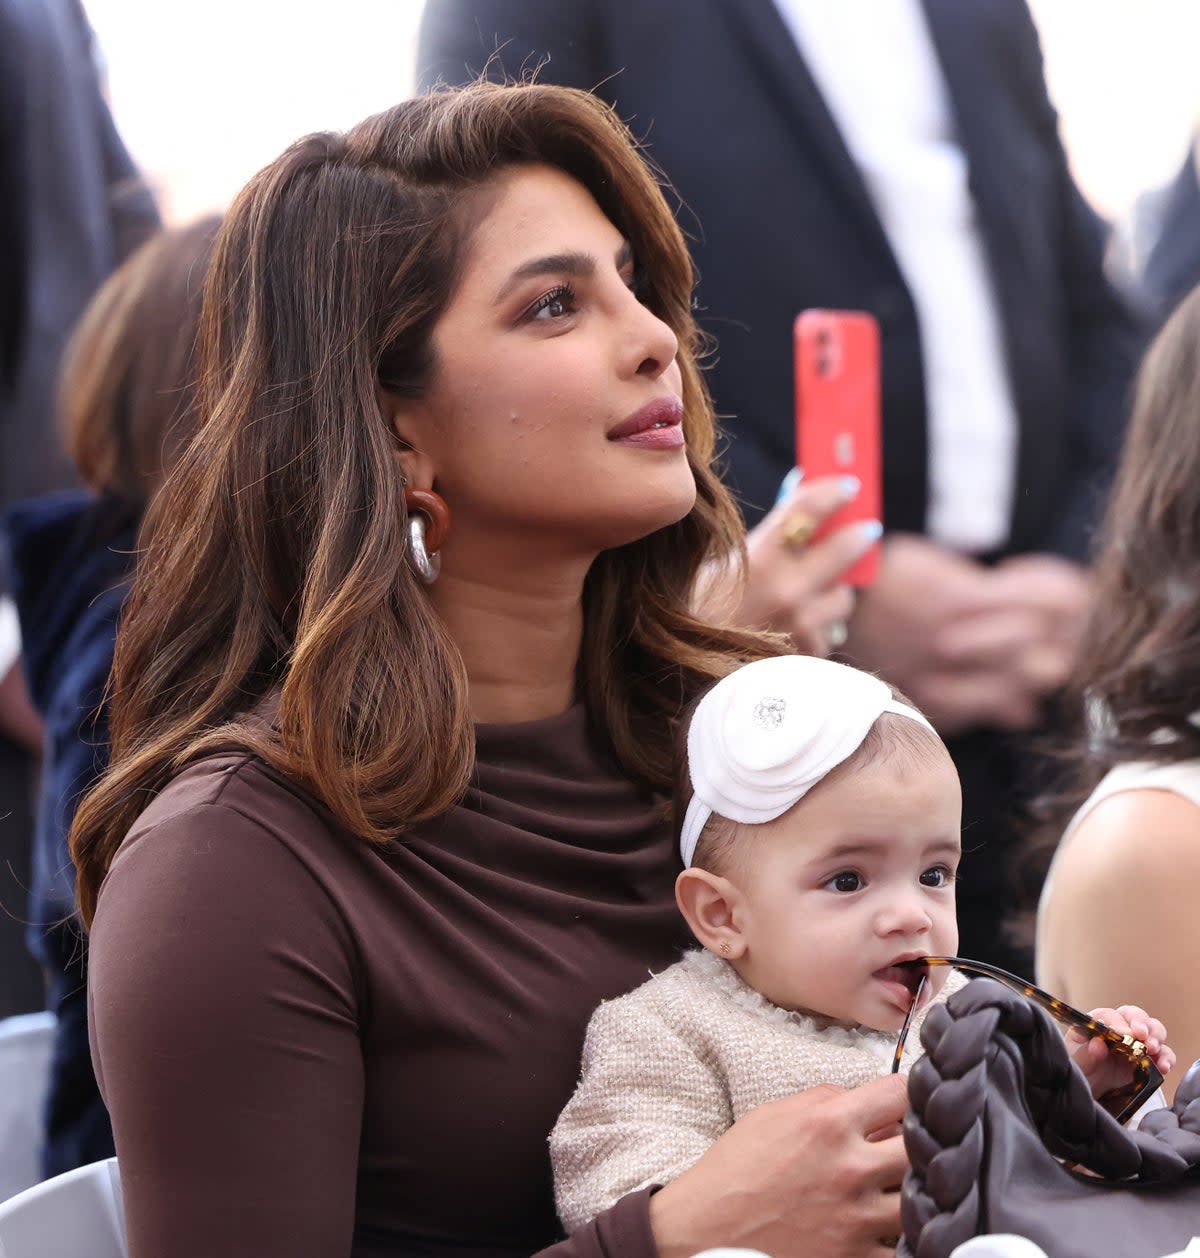 Priyanka Chopra holds her and Nick Jonas' daughter, Malti, during the ceremony where the Jonas Brothers will unveil their star on The Hollywood Walk of Fame in Los Angeles (REUTERS)